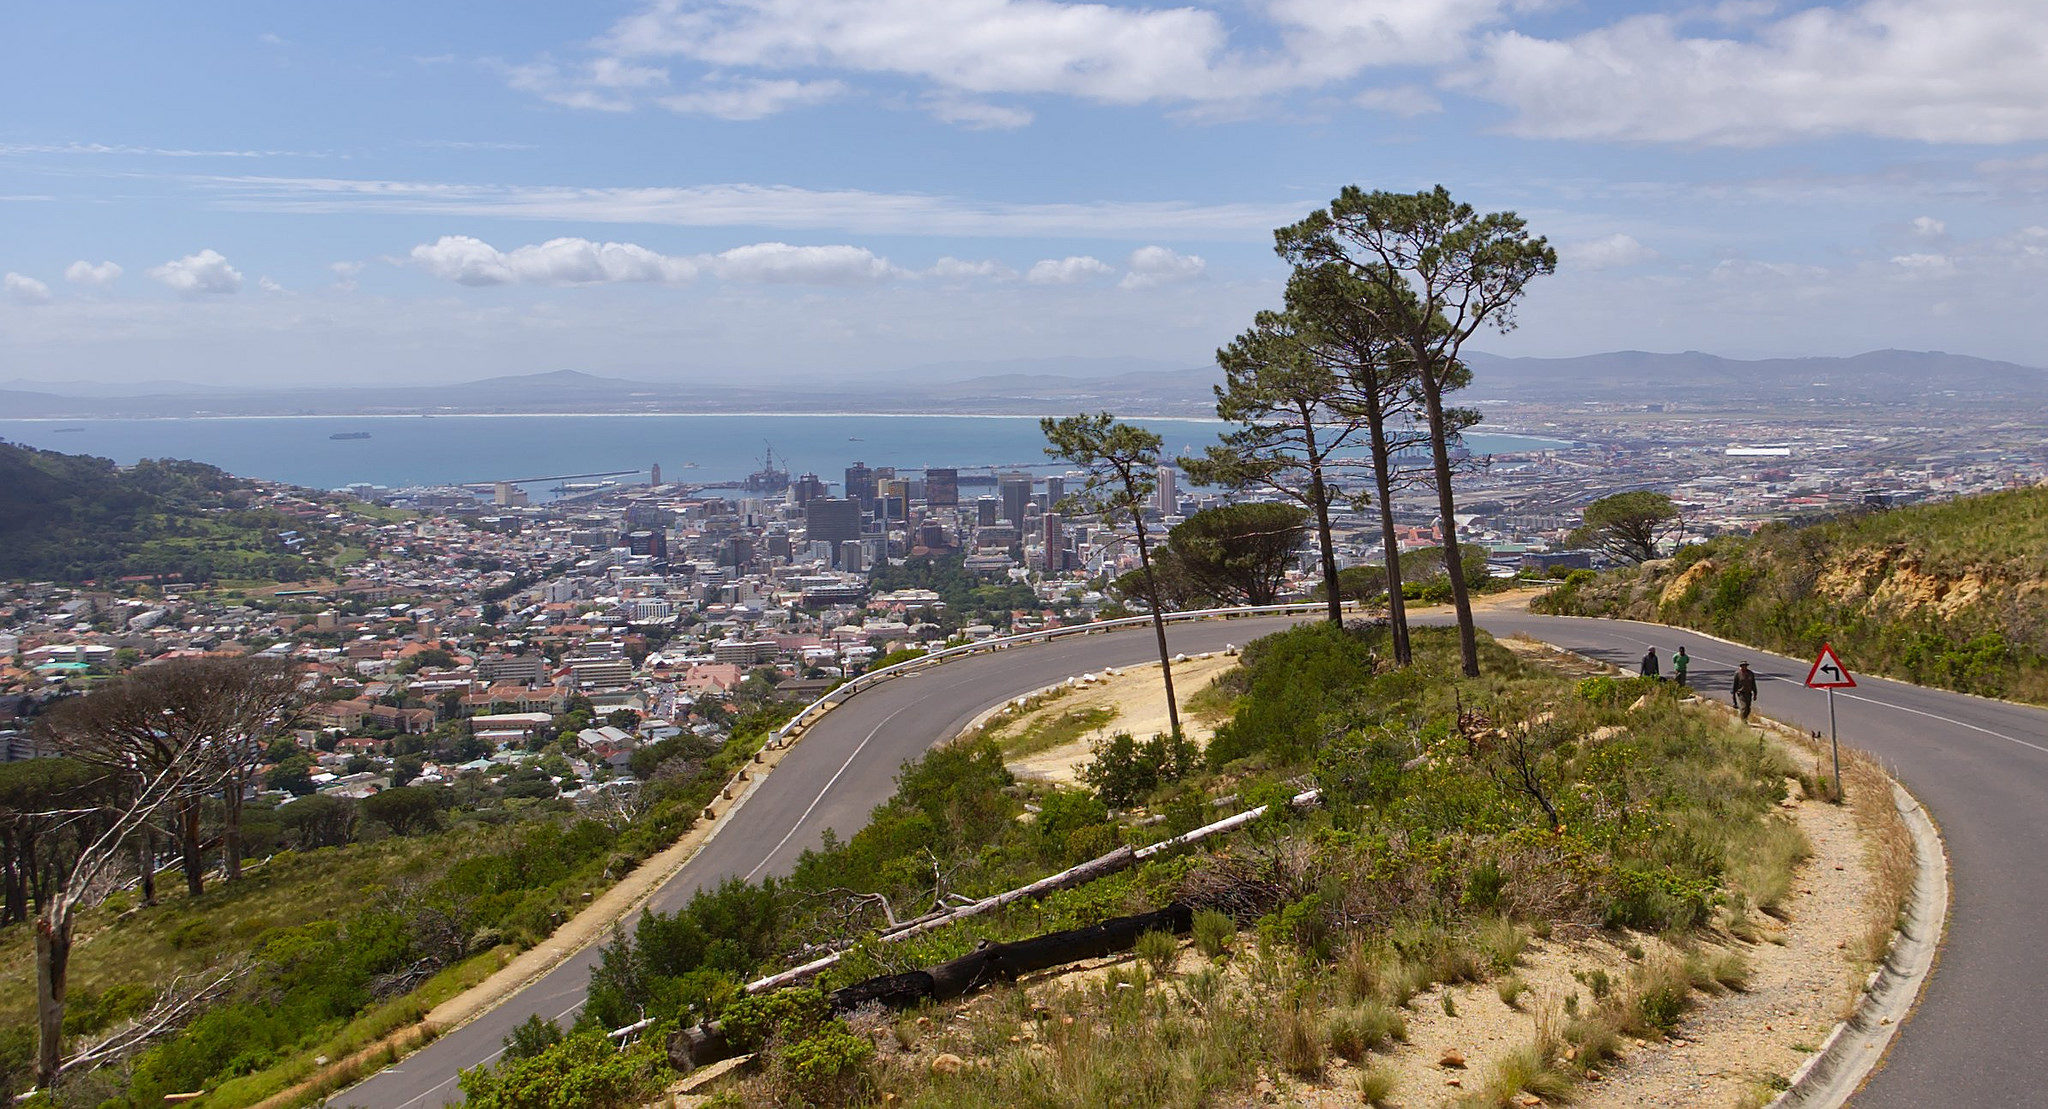 Cape Town. Credit: Rob Oo, Flickr